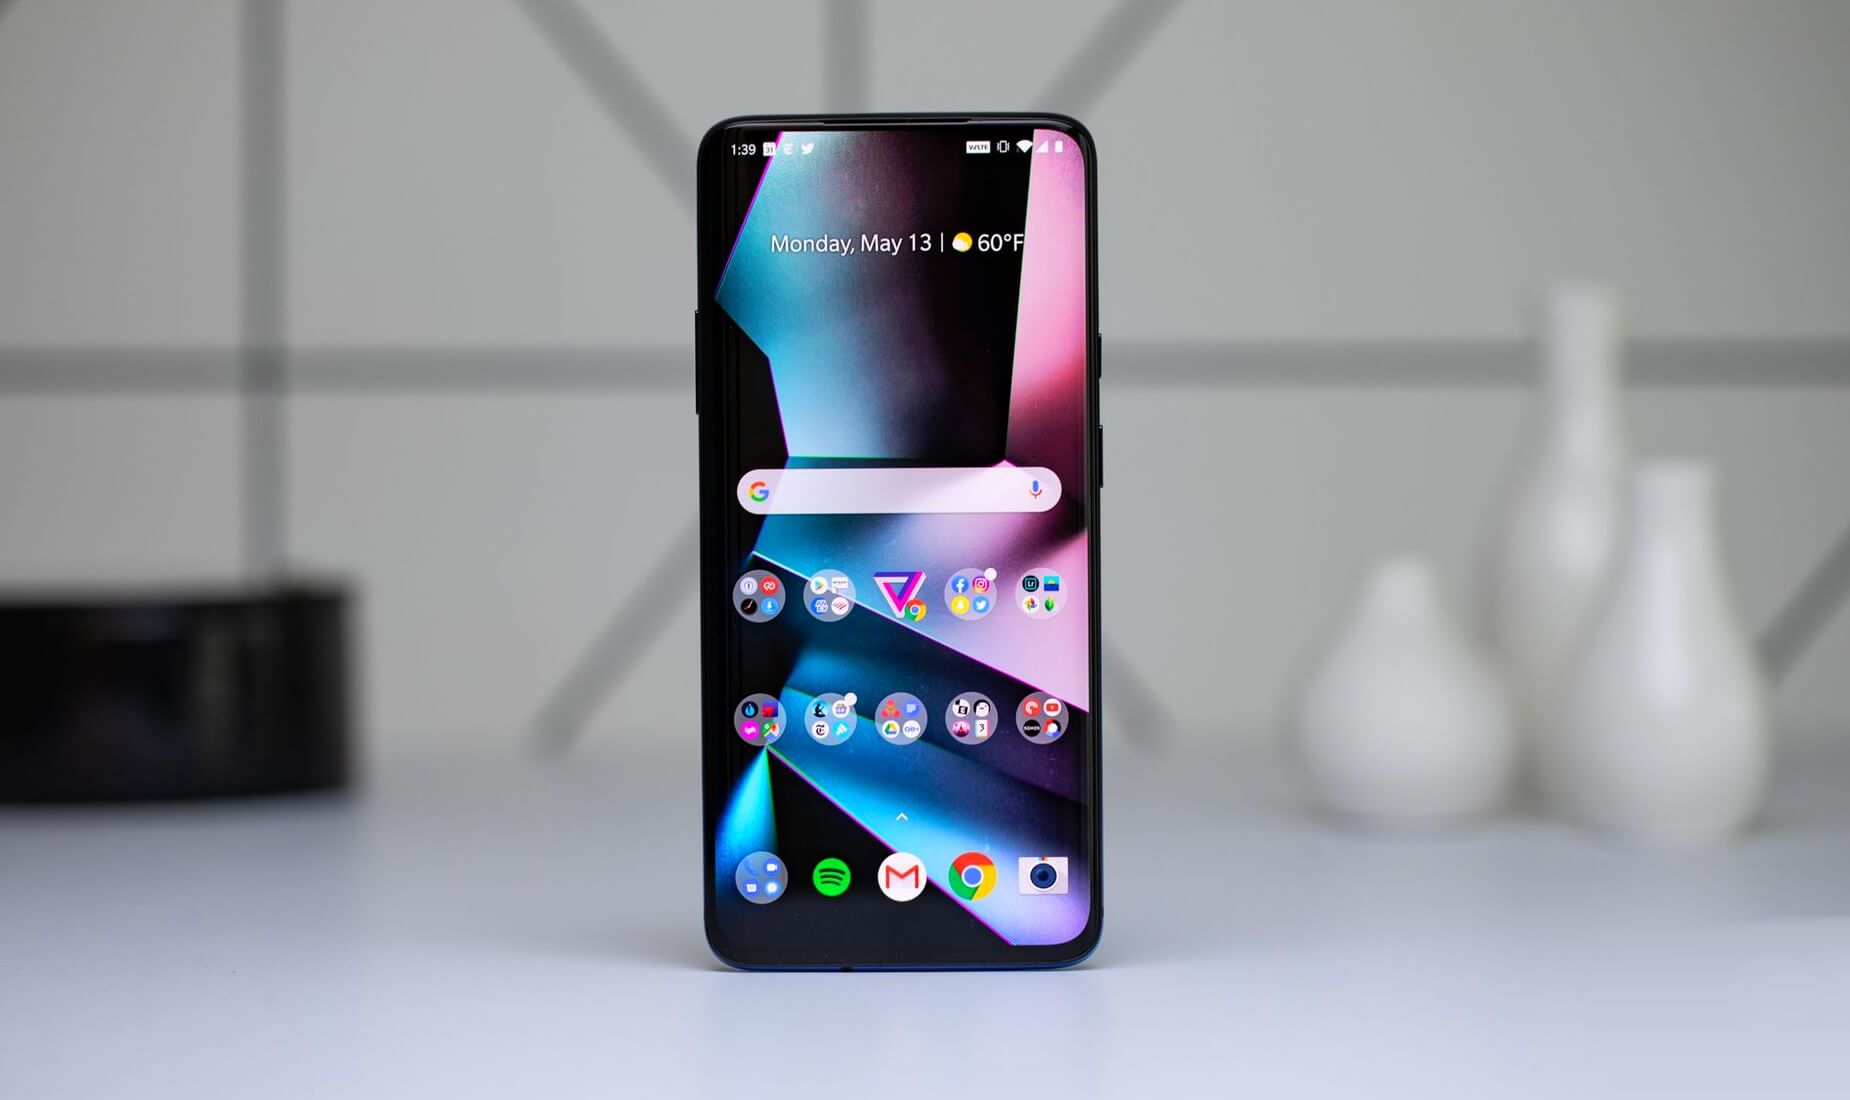 OnePlus 7 Pro front